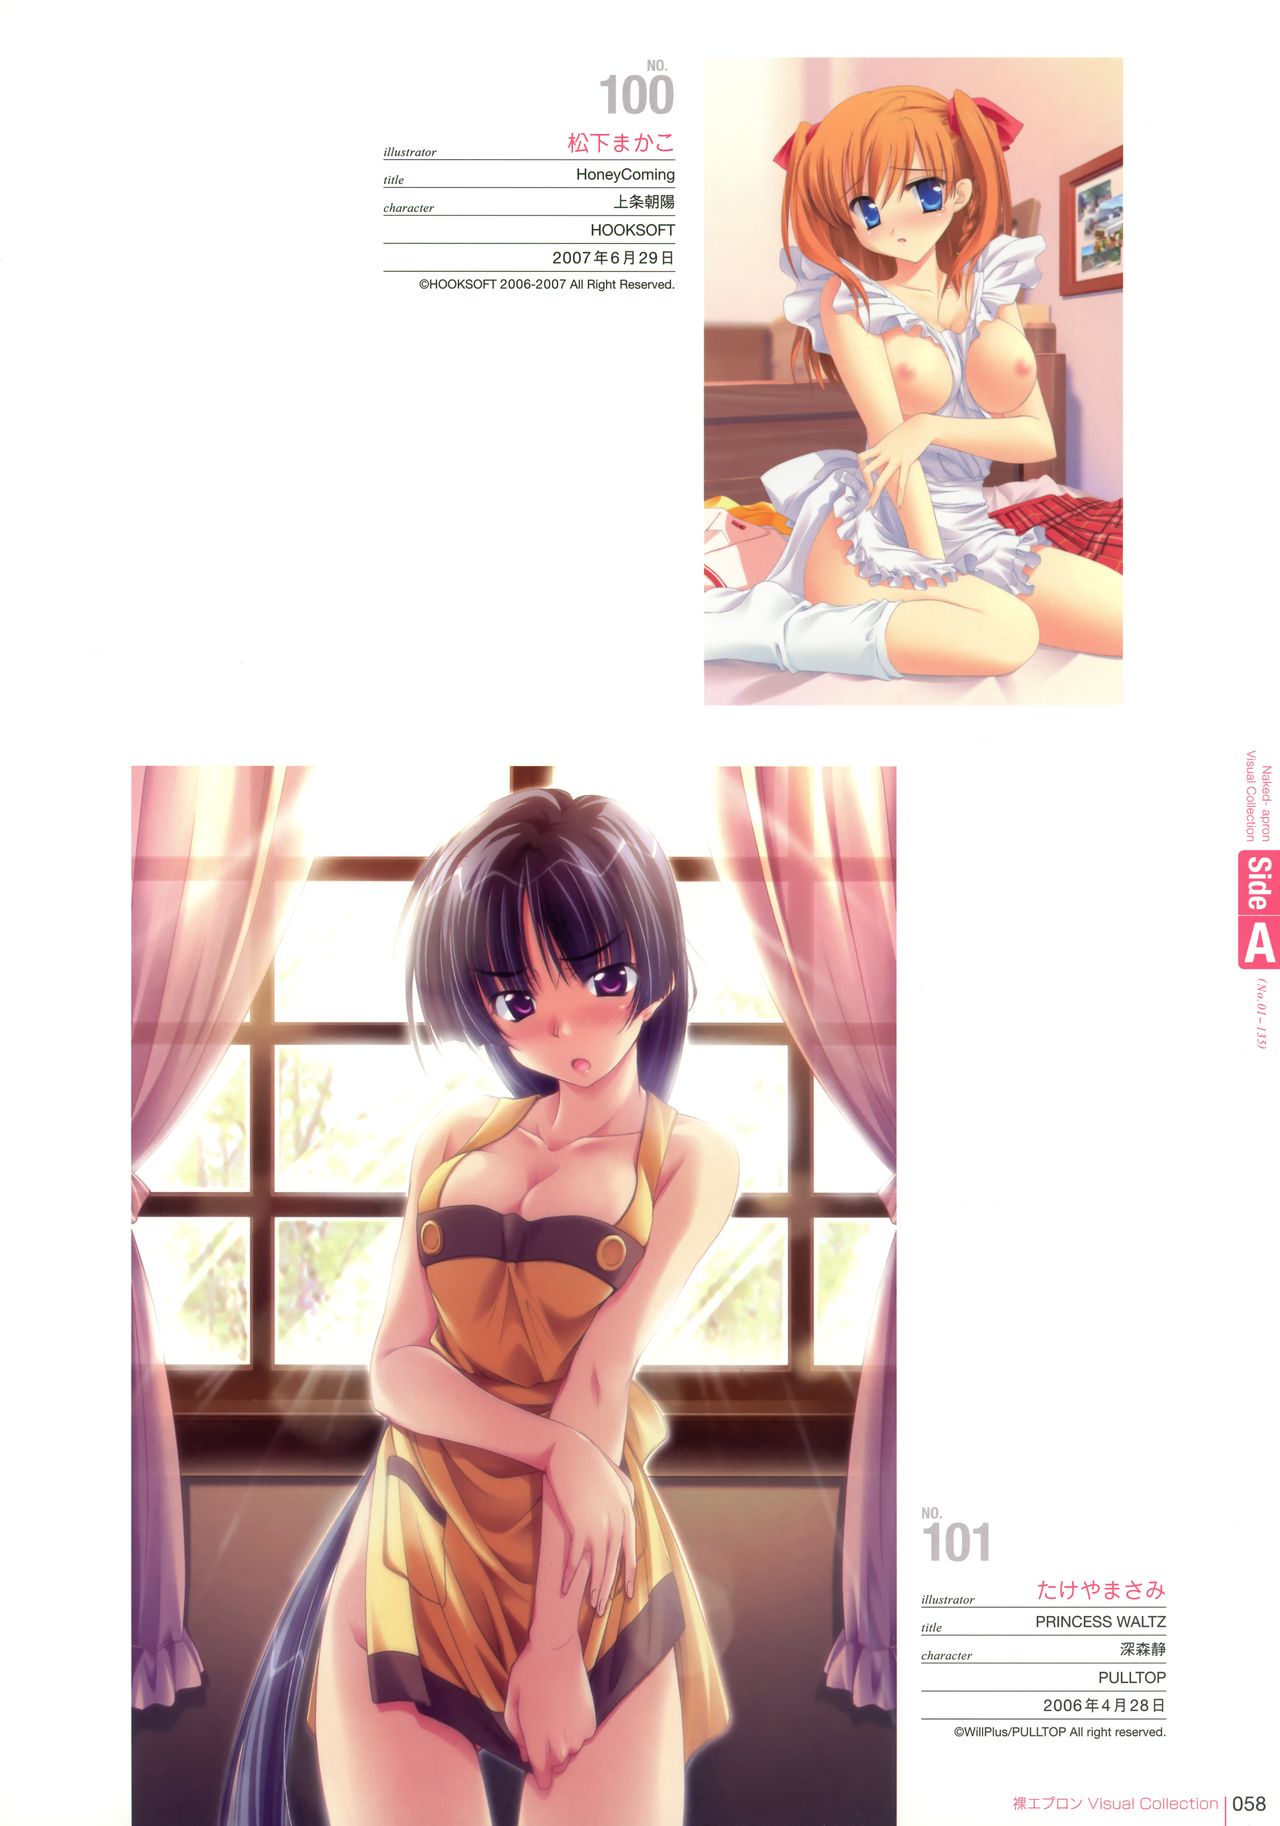 Naked Apron Visual Collection 裸エプロンVisual Collection